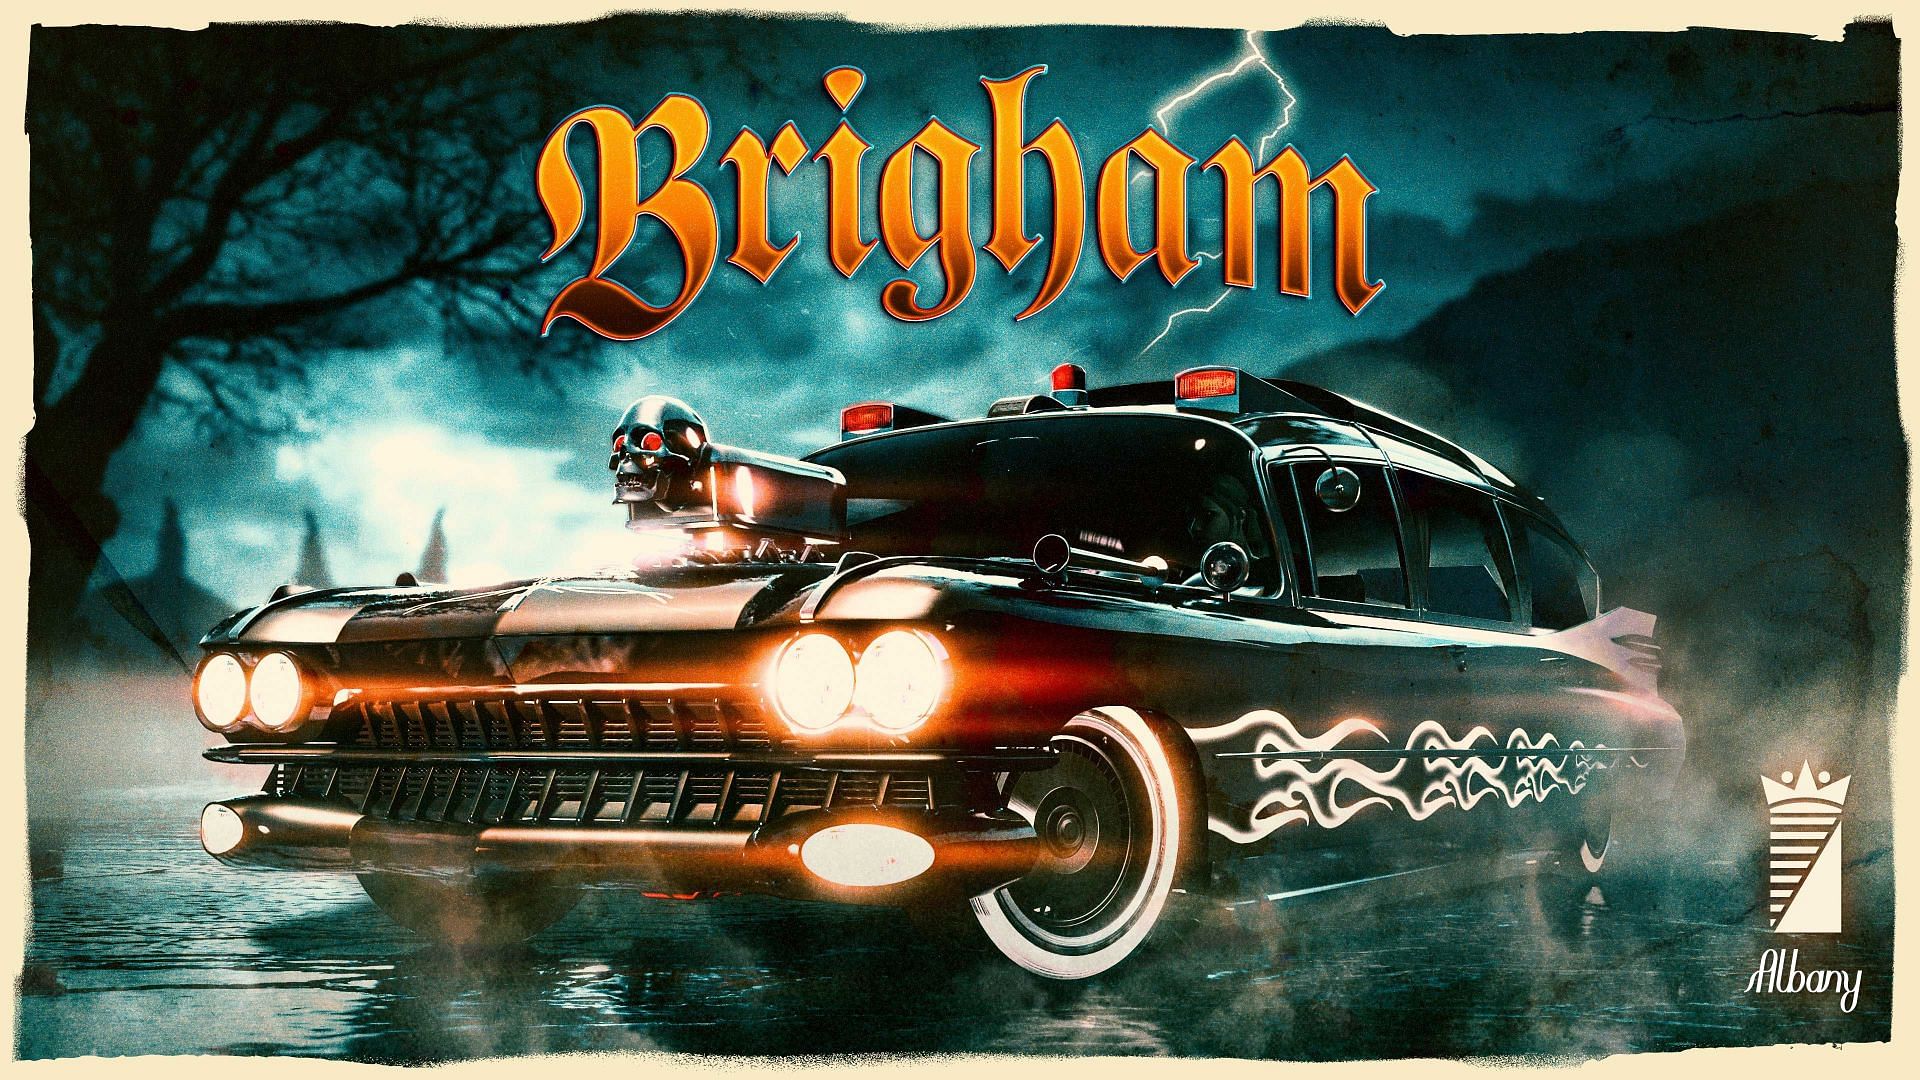 A free Albany Brigham is also offered this month (Image via Rockstar Games)